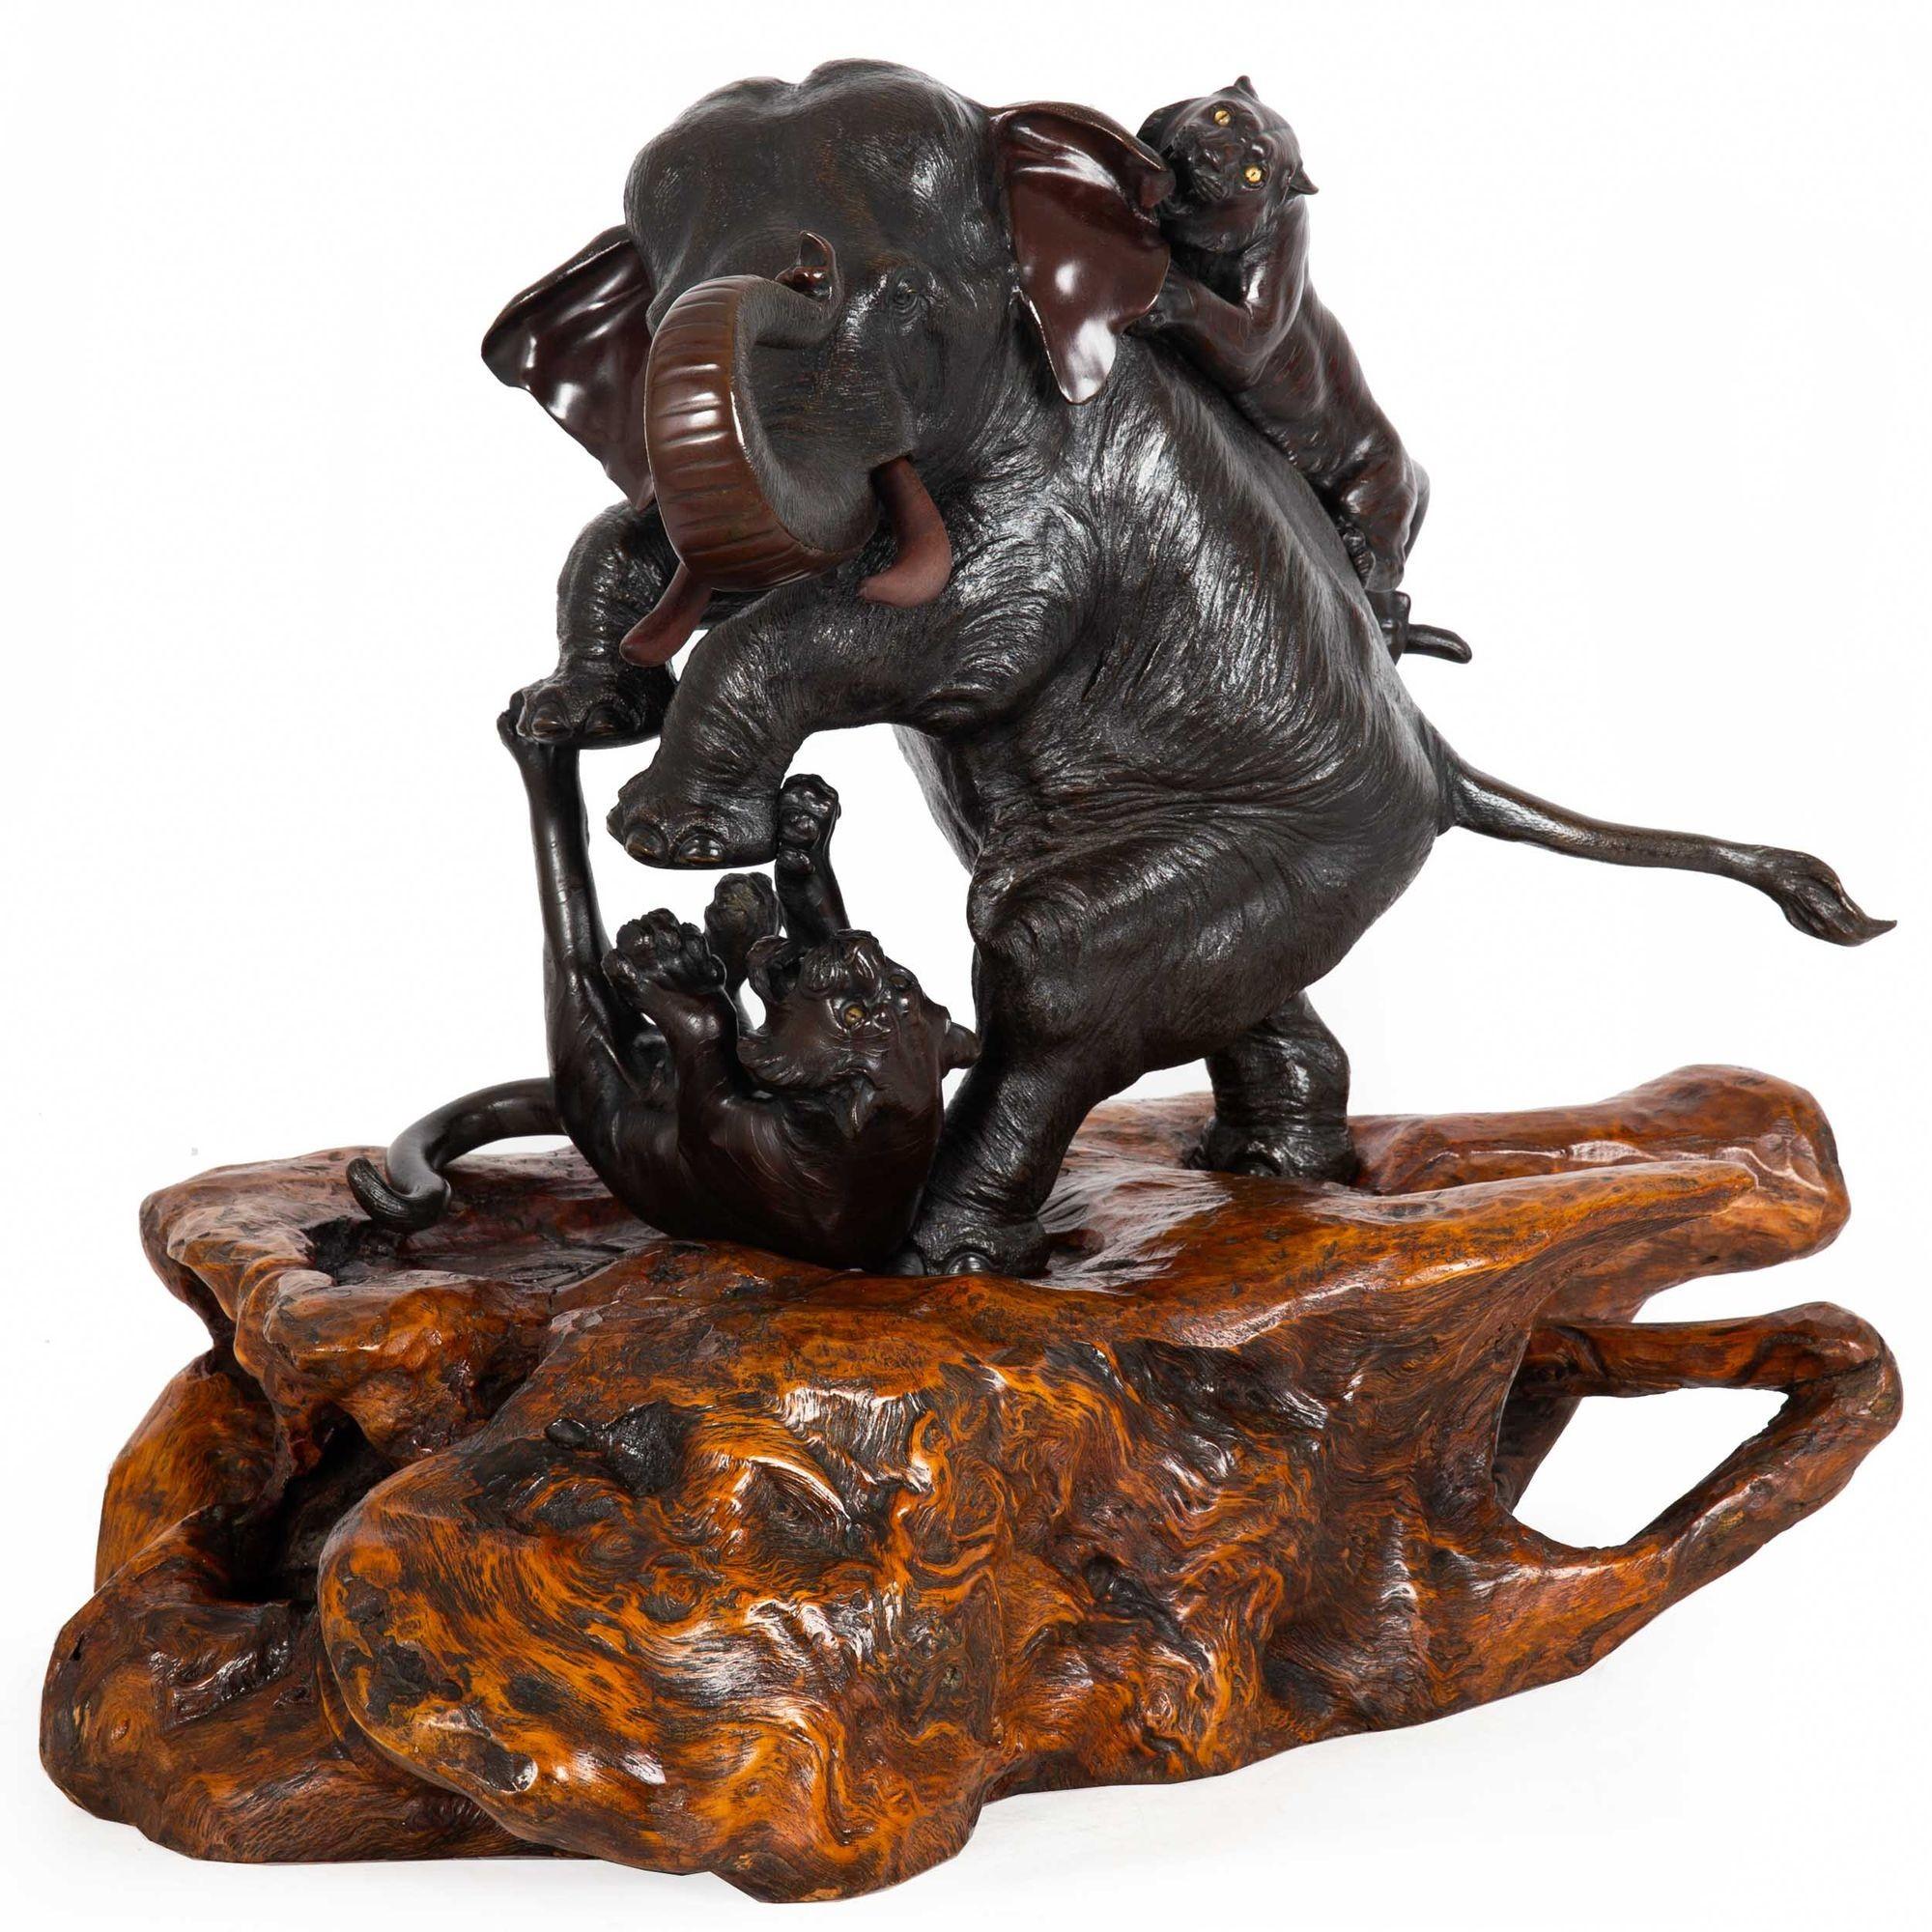 MEIJI PERIOD BRONZE OKIMONO OF ELEPHANT BEING ATTACKED BY TWO TIGERS
Workshop of Omori Mitsumoto (kôgen), 大森光元, Japan, circa 1900

Cast and patinated bronze, hardwood base, two carved hardwood tusks, glass eyes in tigers  signed to the underside of